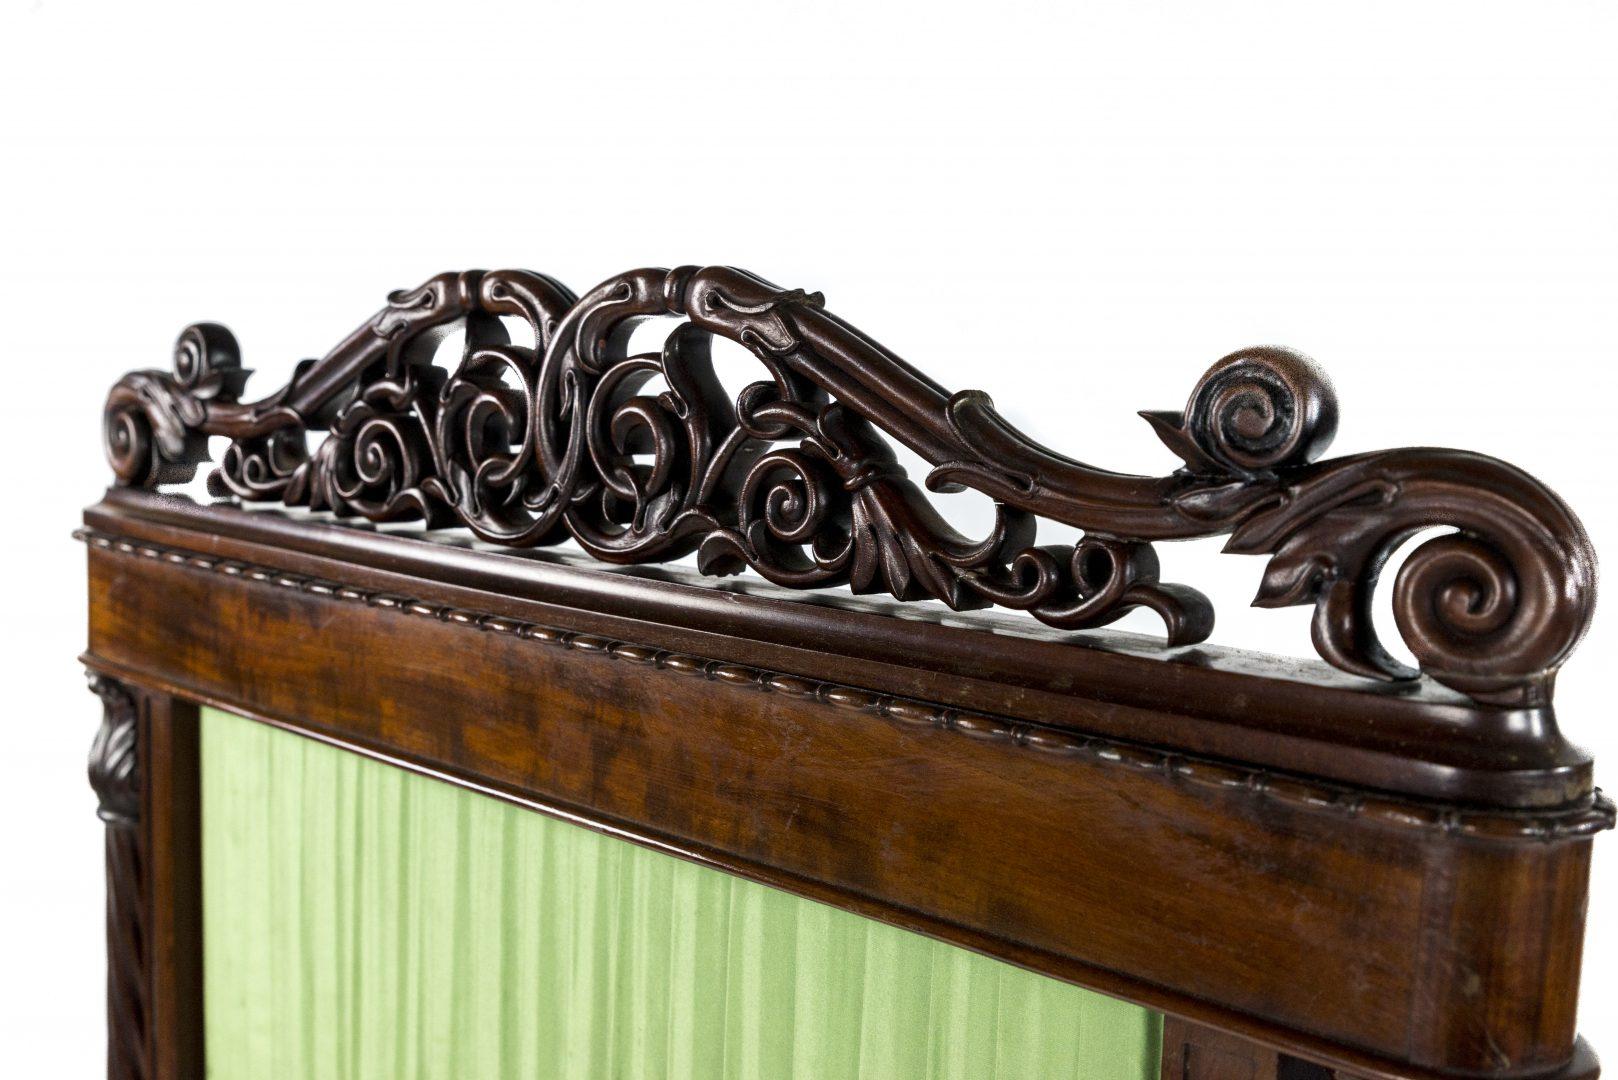 A William IV mahogany atributed to Gillows, profusely carved with scrolling leaves and lappets, with a pleated silk panel flanked by spiral twist batons, above a conforming base and on brass castors, 

Gillows of Lancaster and London, also known